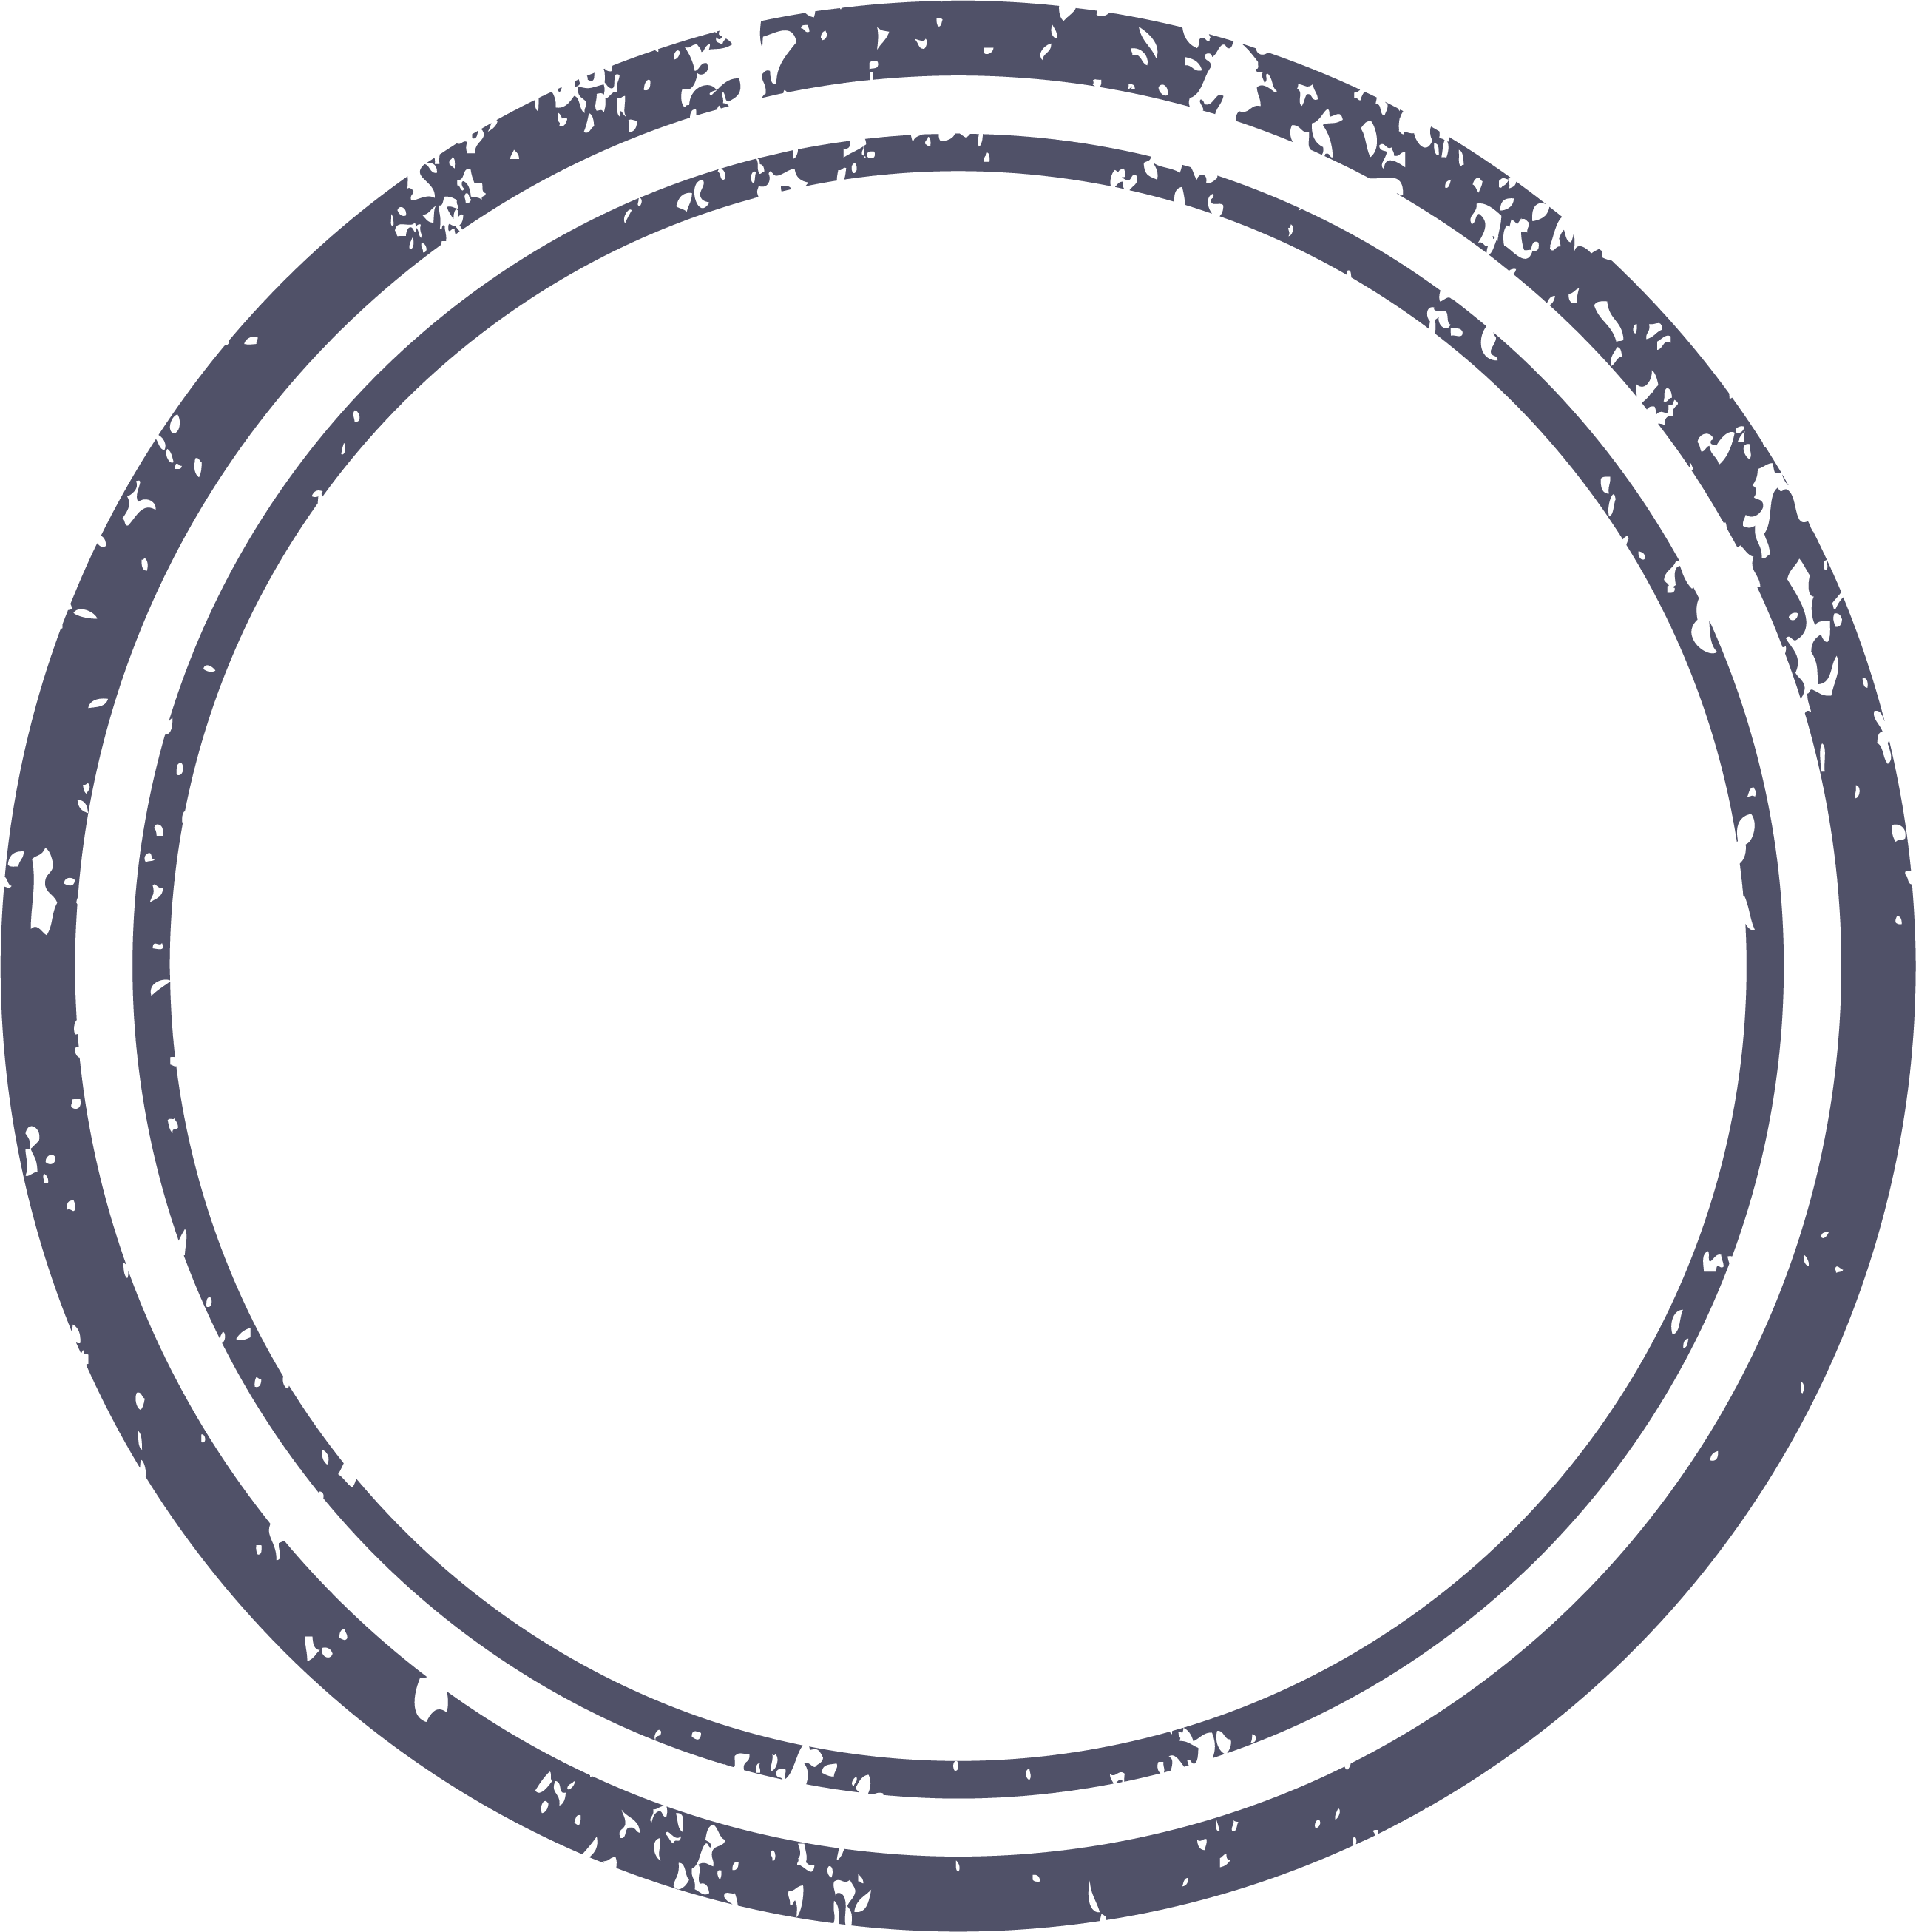 Round Circle PNG Images Transparent Background | PNG Play